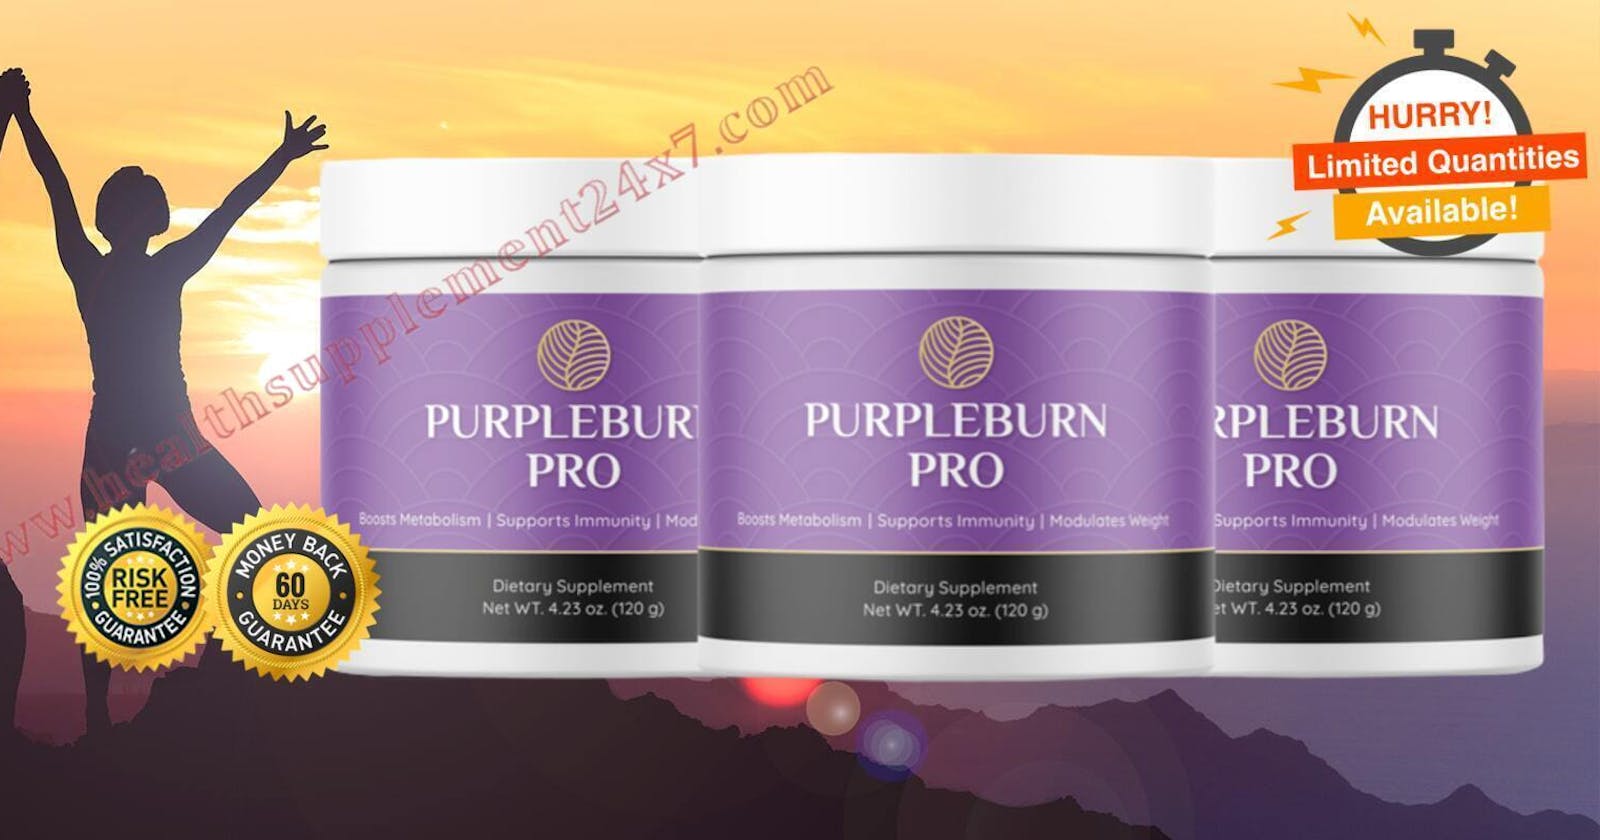 PurpleBurn Pro [#1 Premium Burn Fat For Energy, Not Carbs] Supports Weight Loss Reduce Appetite & Cravings(Spam Or Legit)